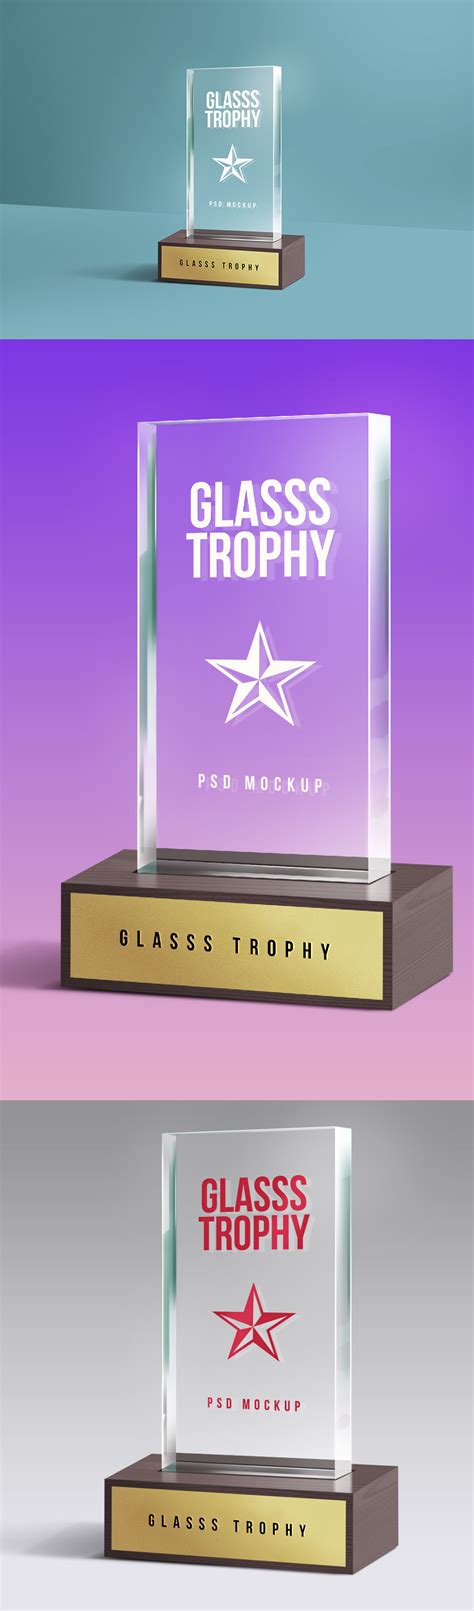 glass trophy psd mockup graphicsfuel